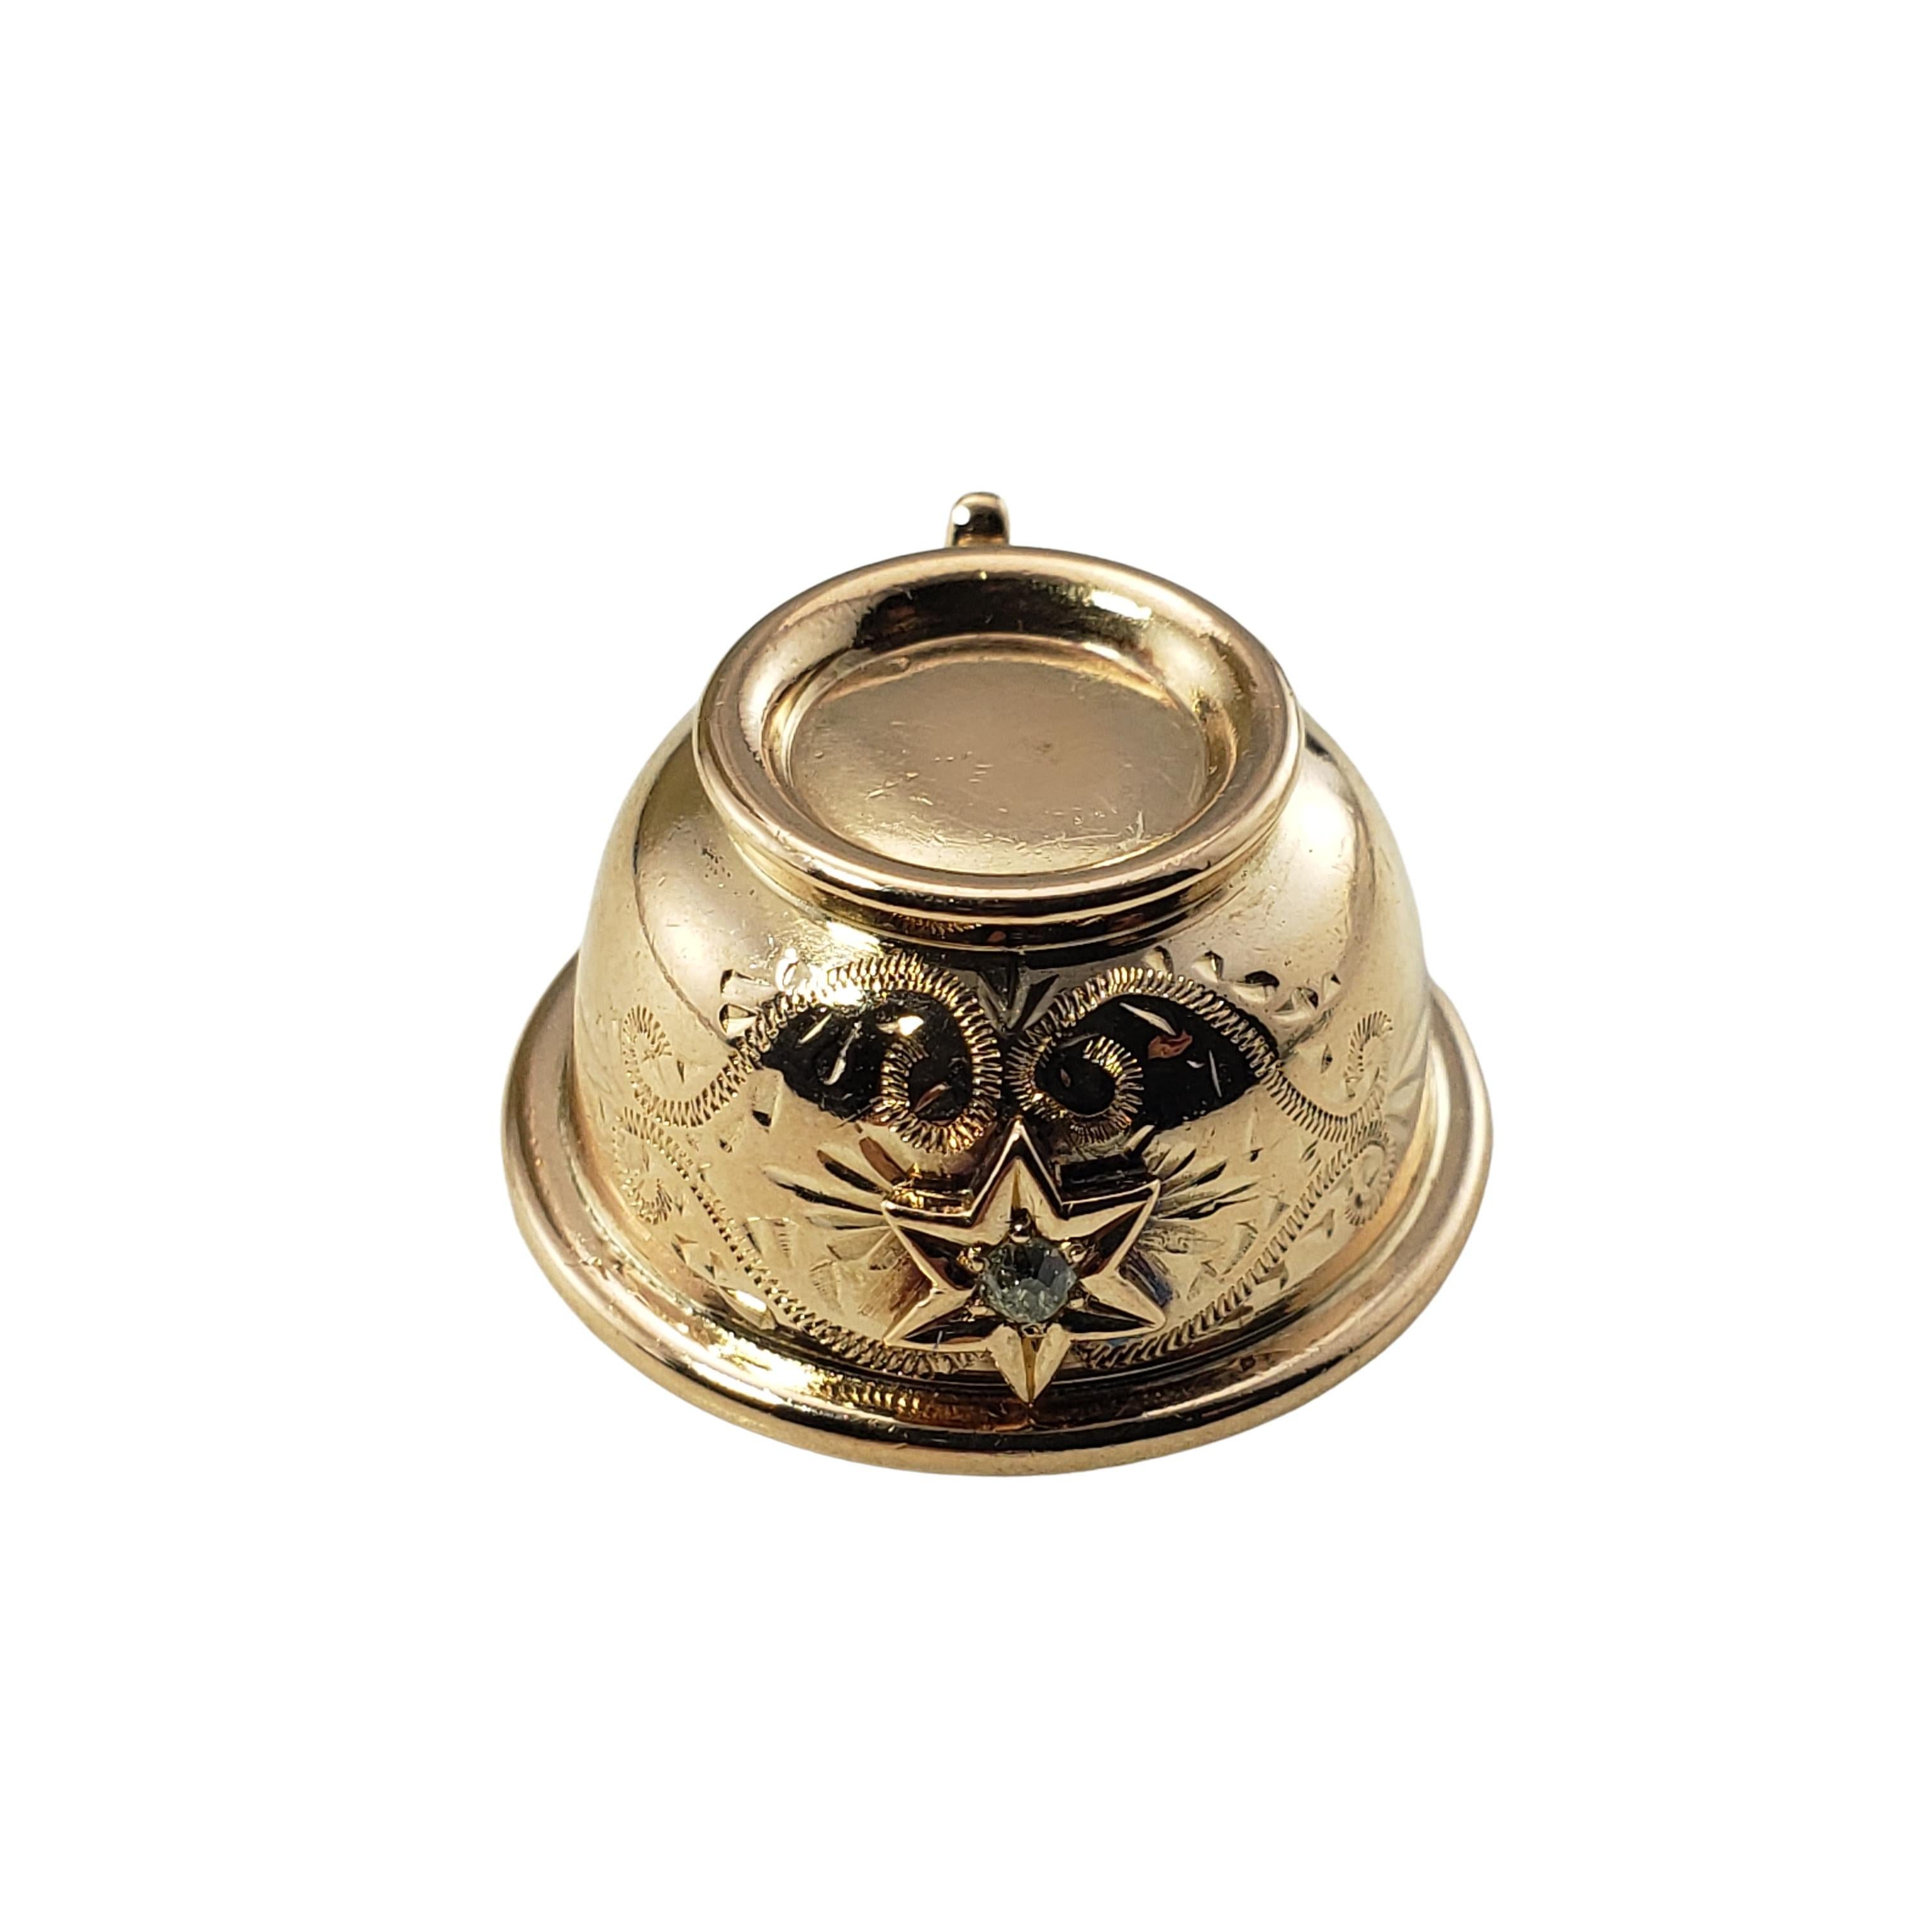 14 Karat Yellow Gold and Diamond Teacup Charm-

This lovely 3D charm features a miniature teacup accented with one round single cut diamond set in beautifully detailed 14K yellow gold.

Approximate total diamond weight:  .03 ct.

Diamond color: Top